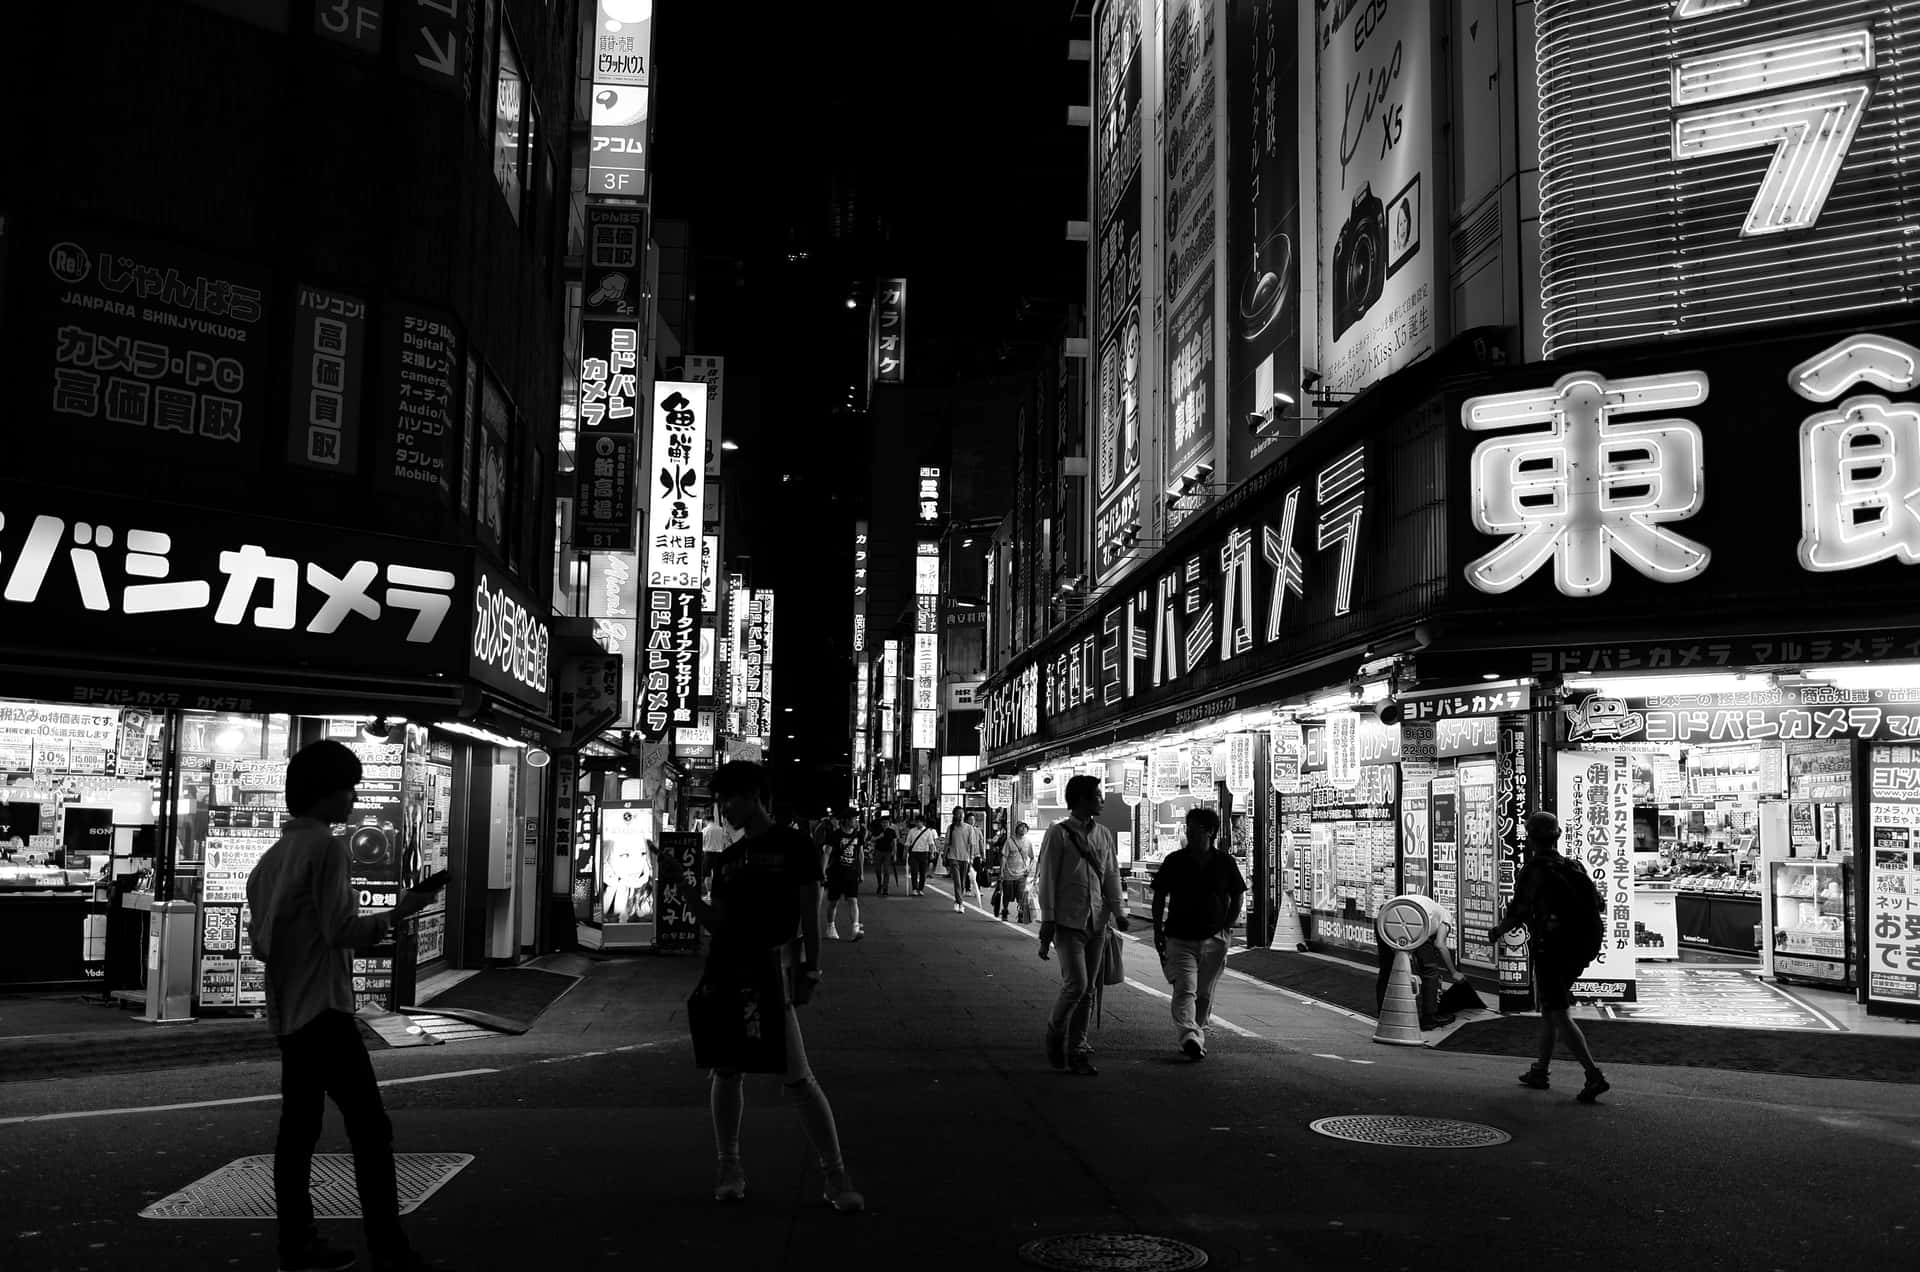 A Black and White View of Japan Wallpaper